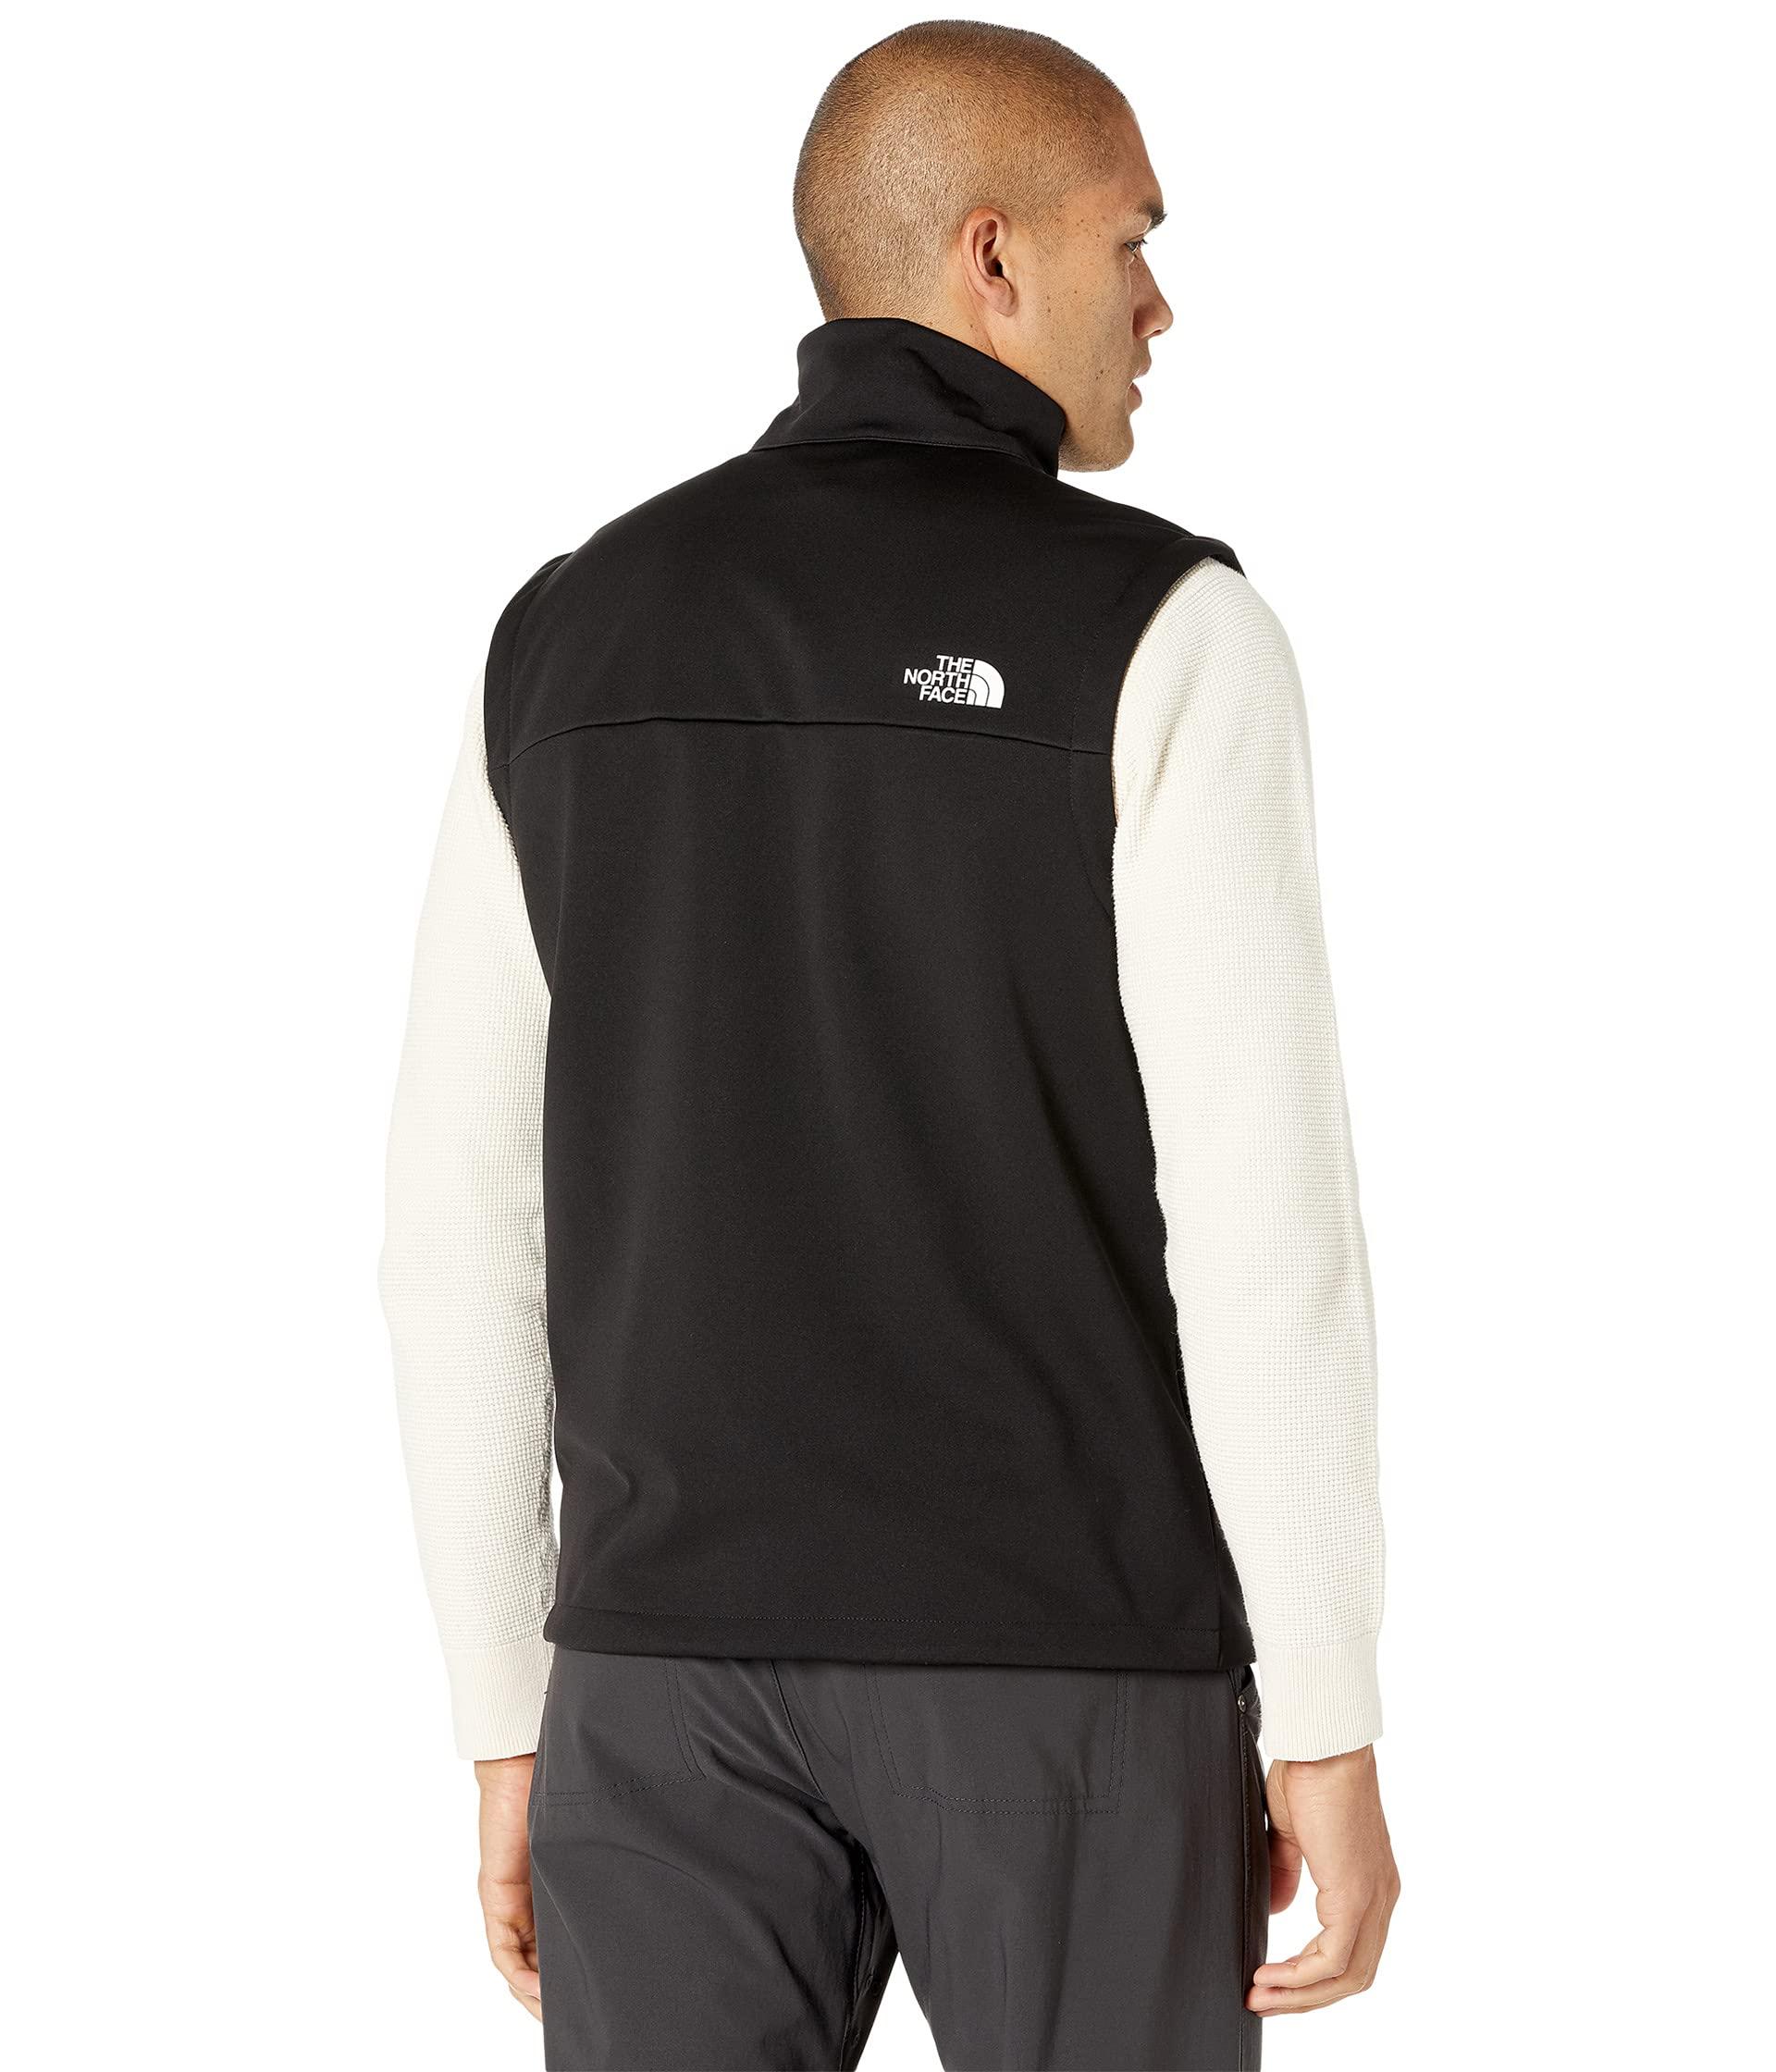 Monterey Blue Visita lo Store di The North FaceThe North Face Men's Apex Canyonwall Eco Vest 